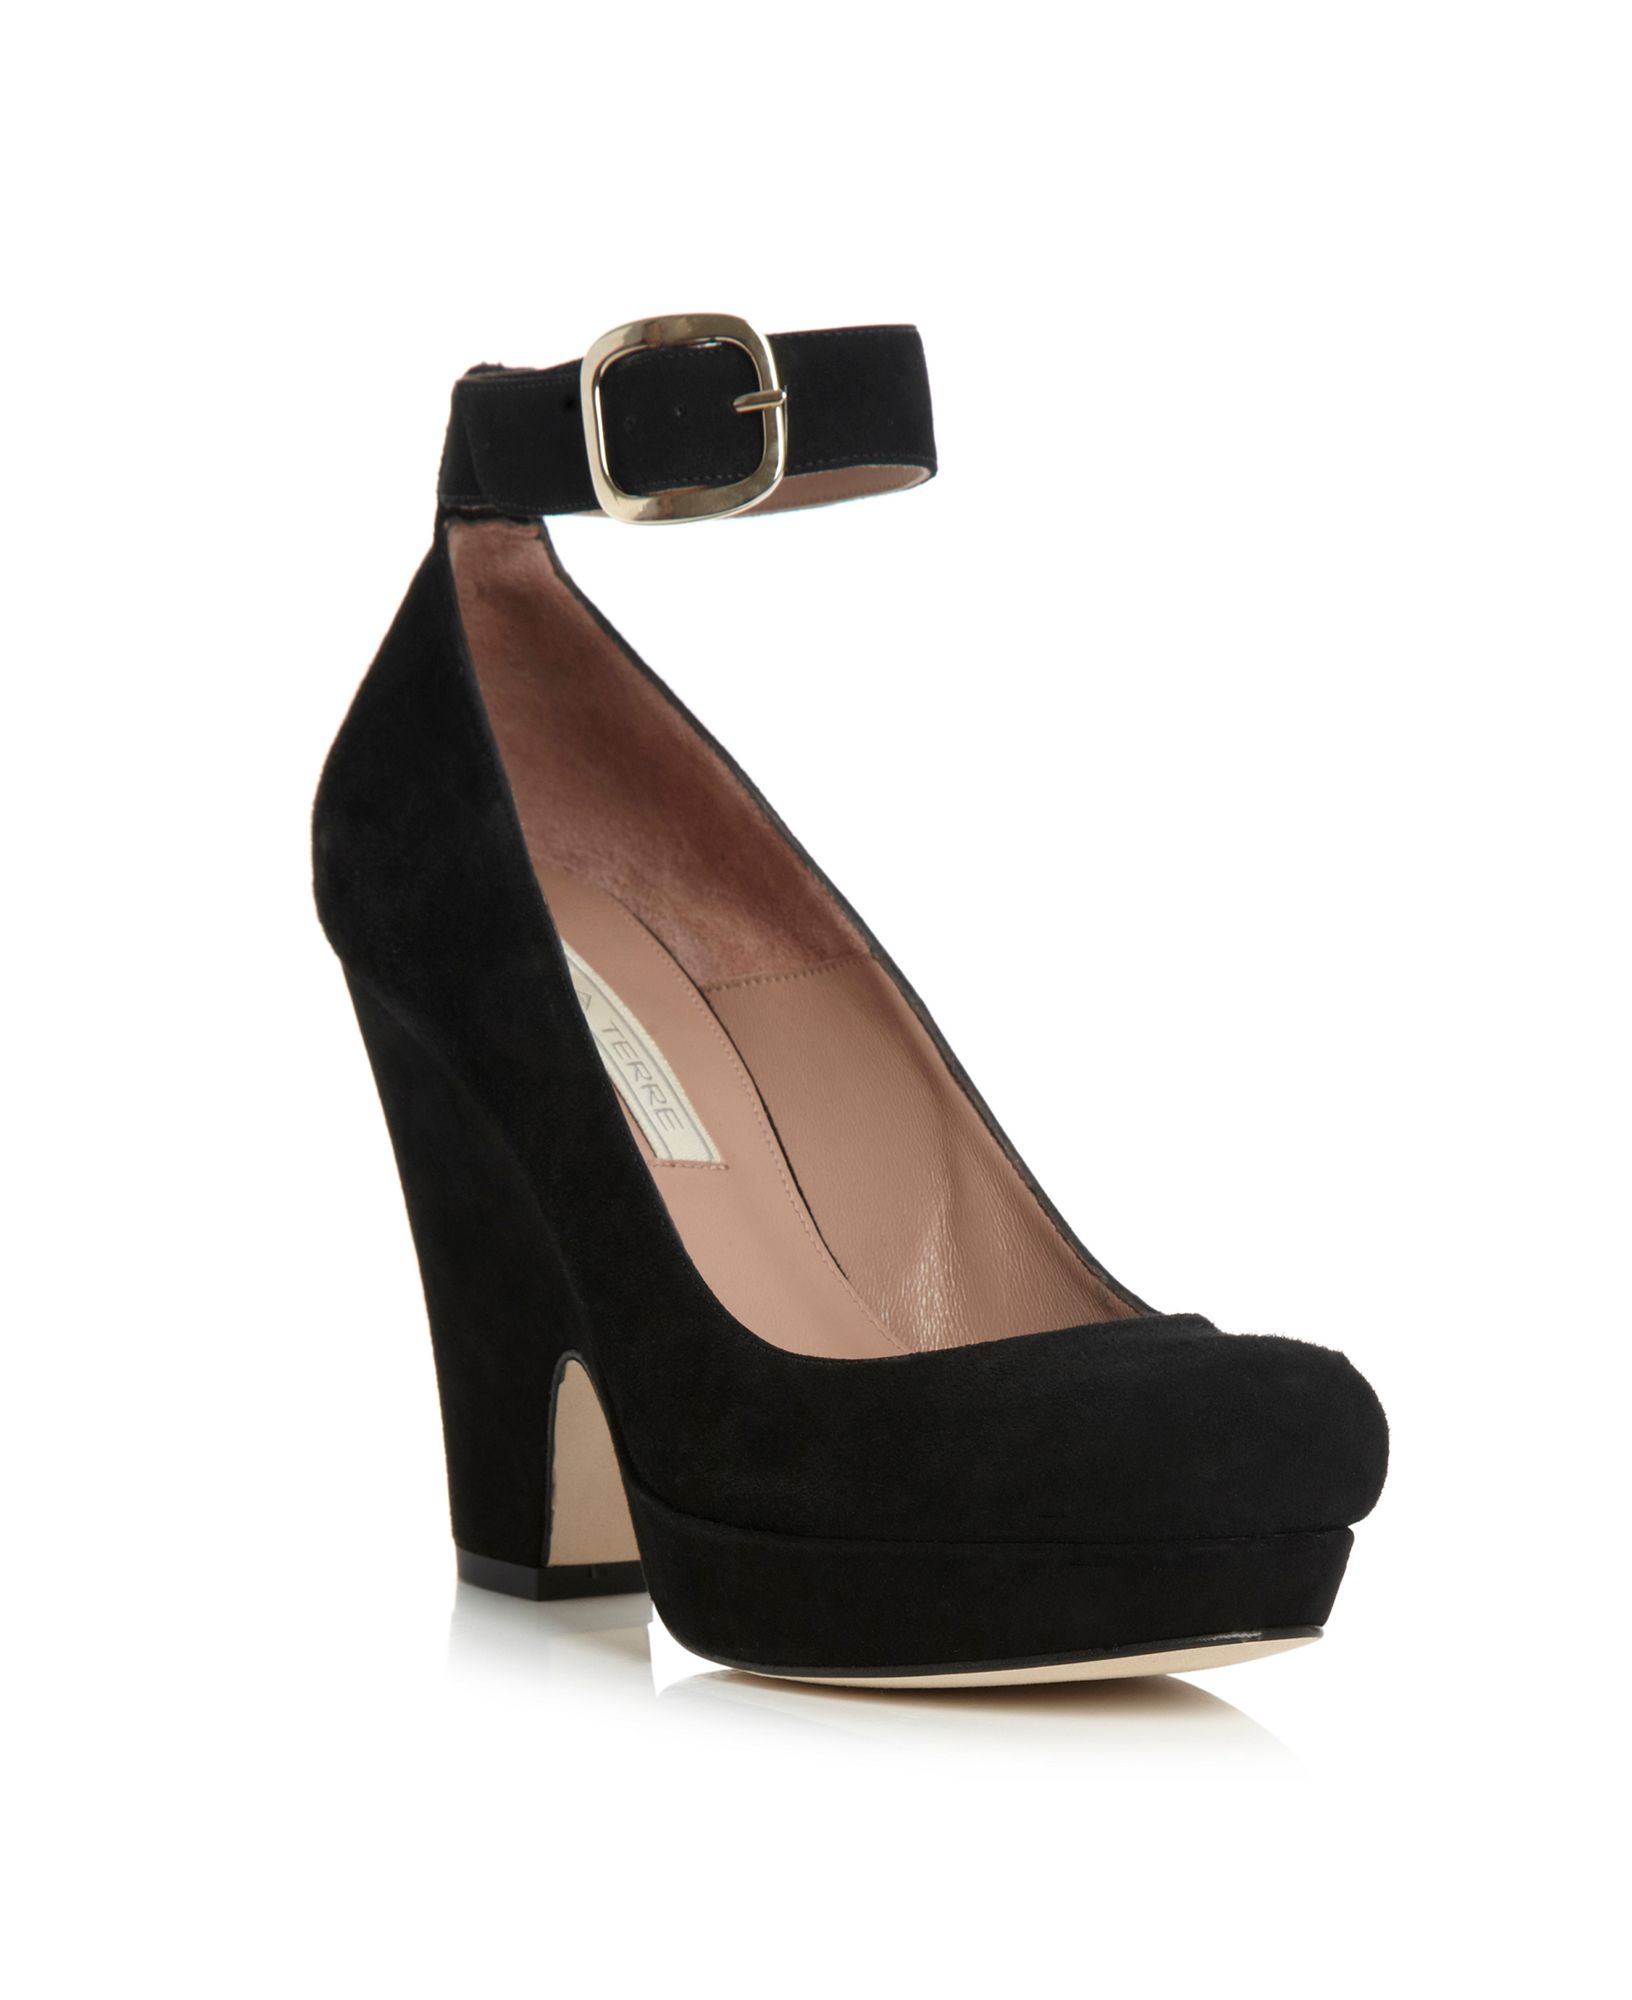 Pied A Terre Adler Ankle Cuff Court Shoes in Black | Lyst